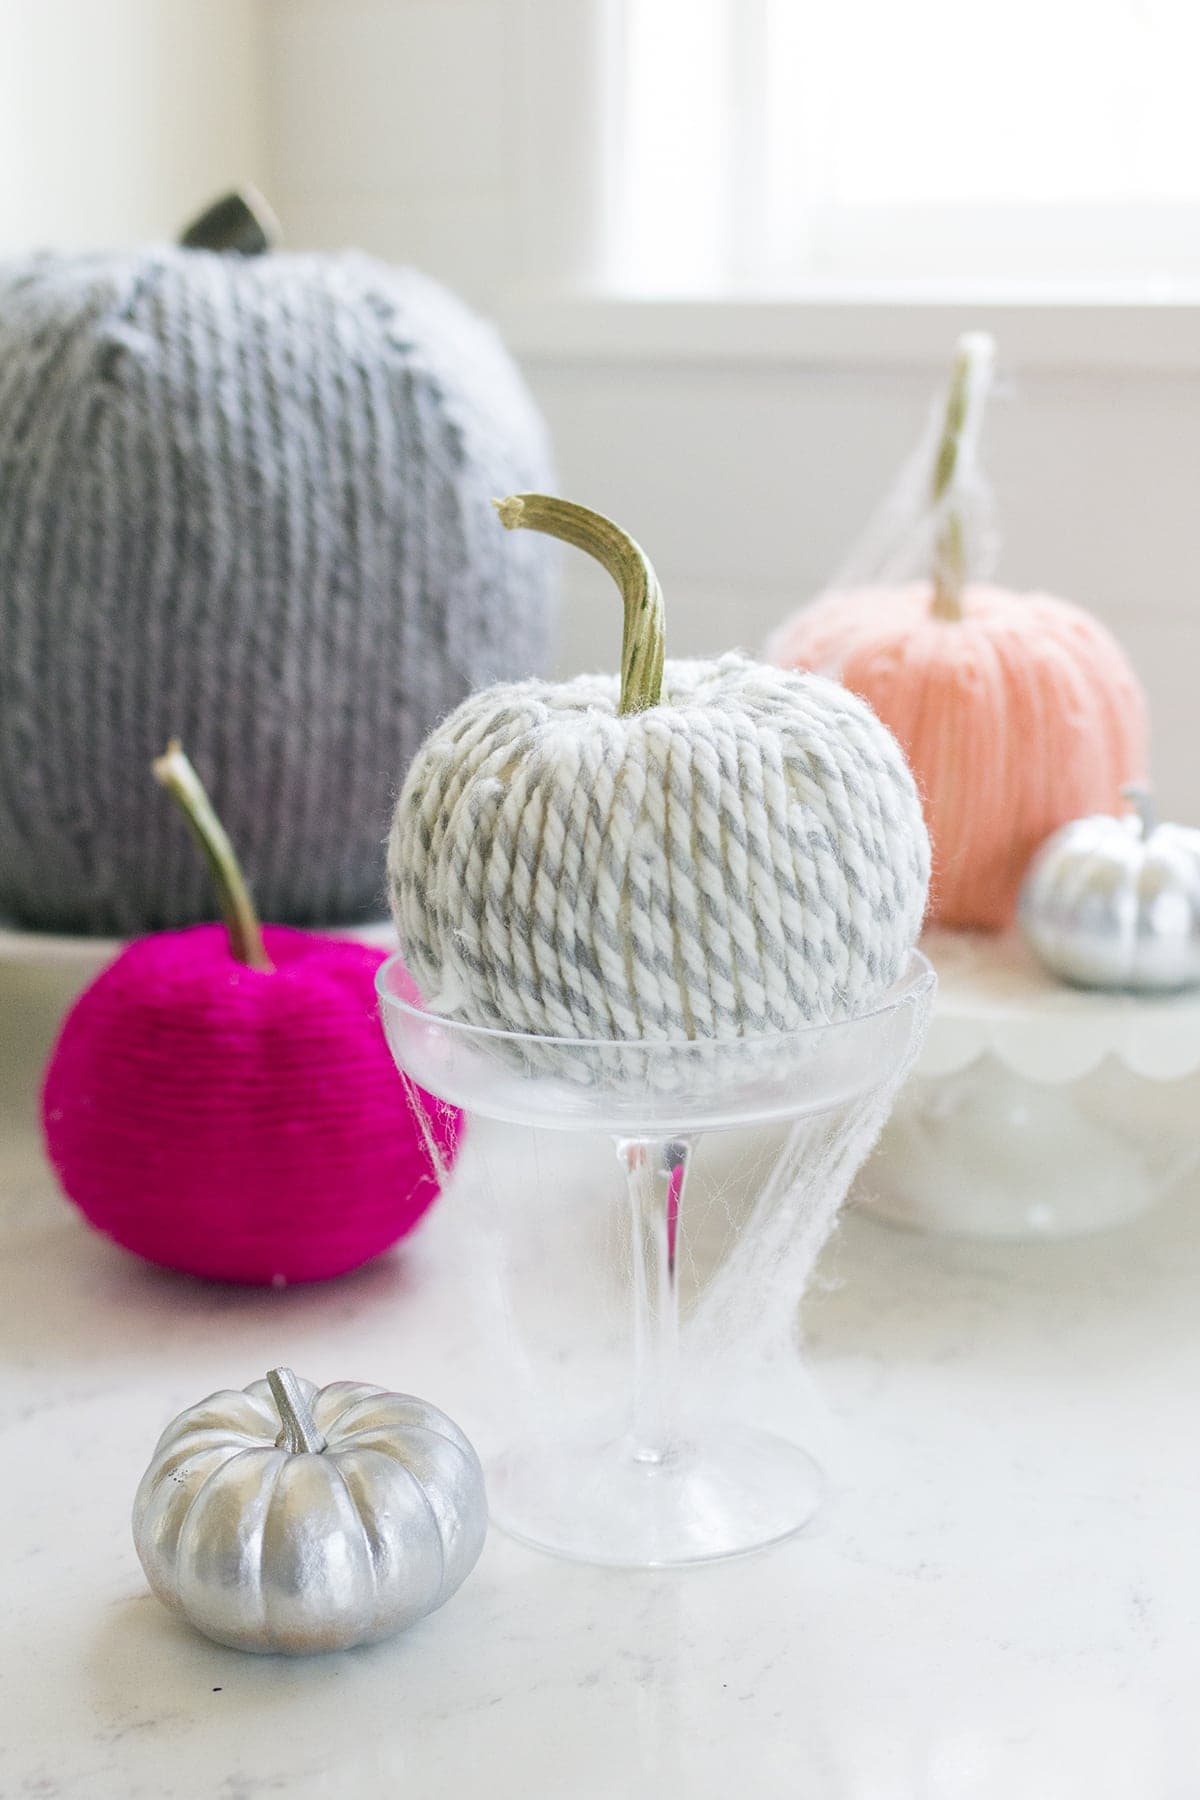 Yarn Covered Pumpkins How-to for Halloween